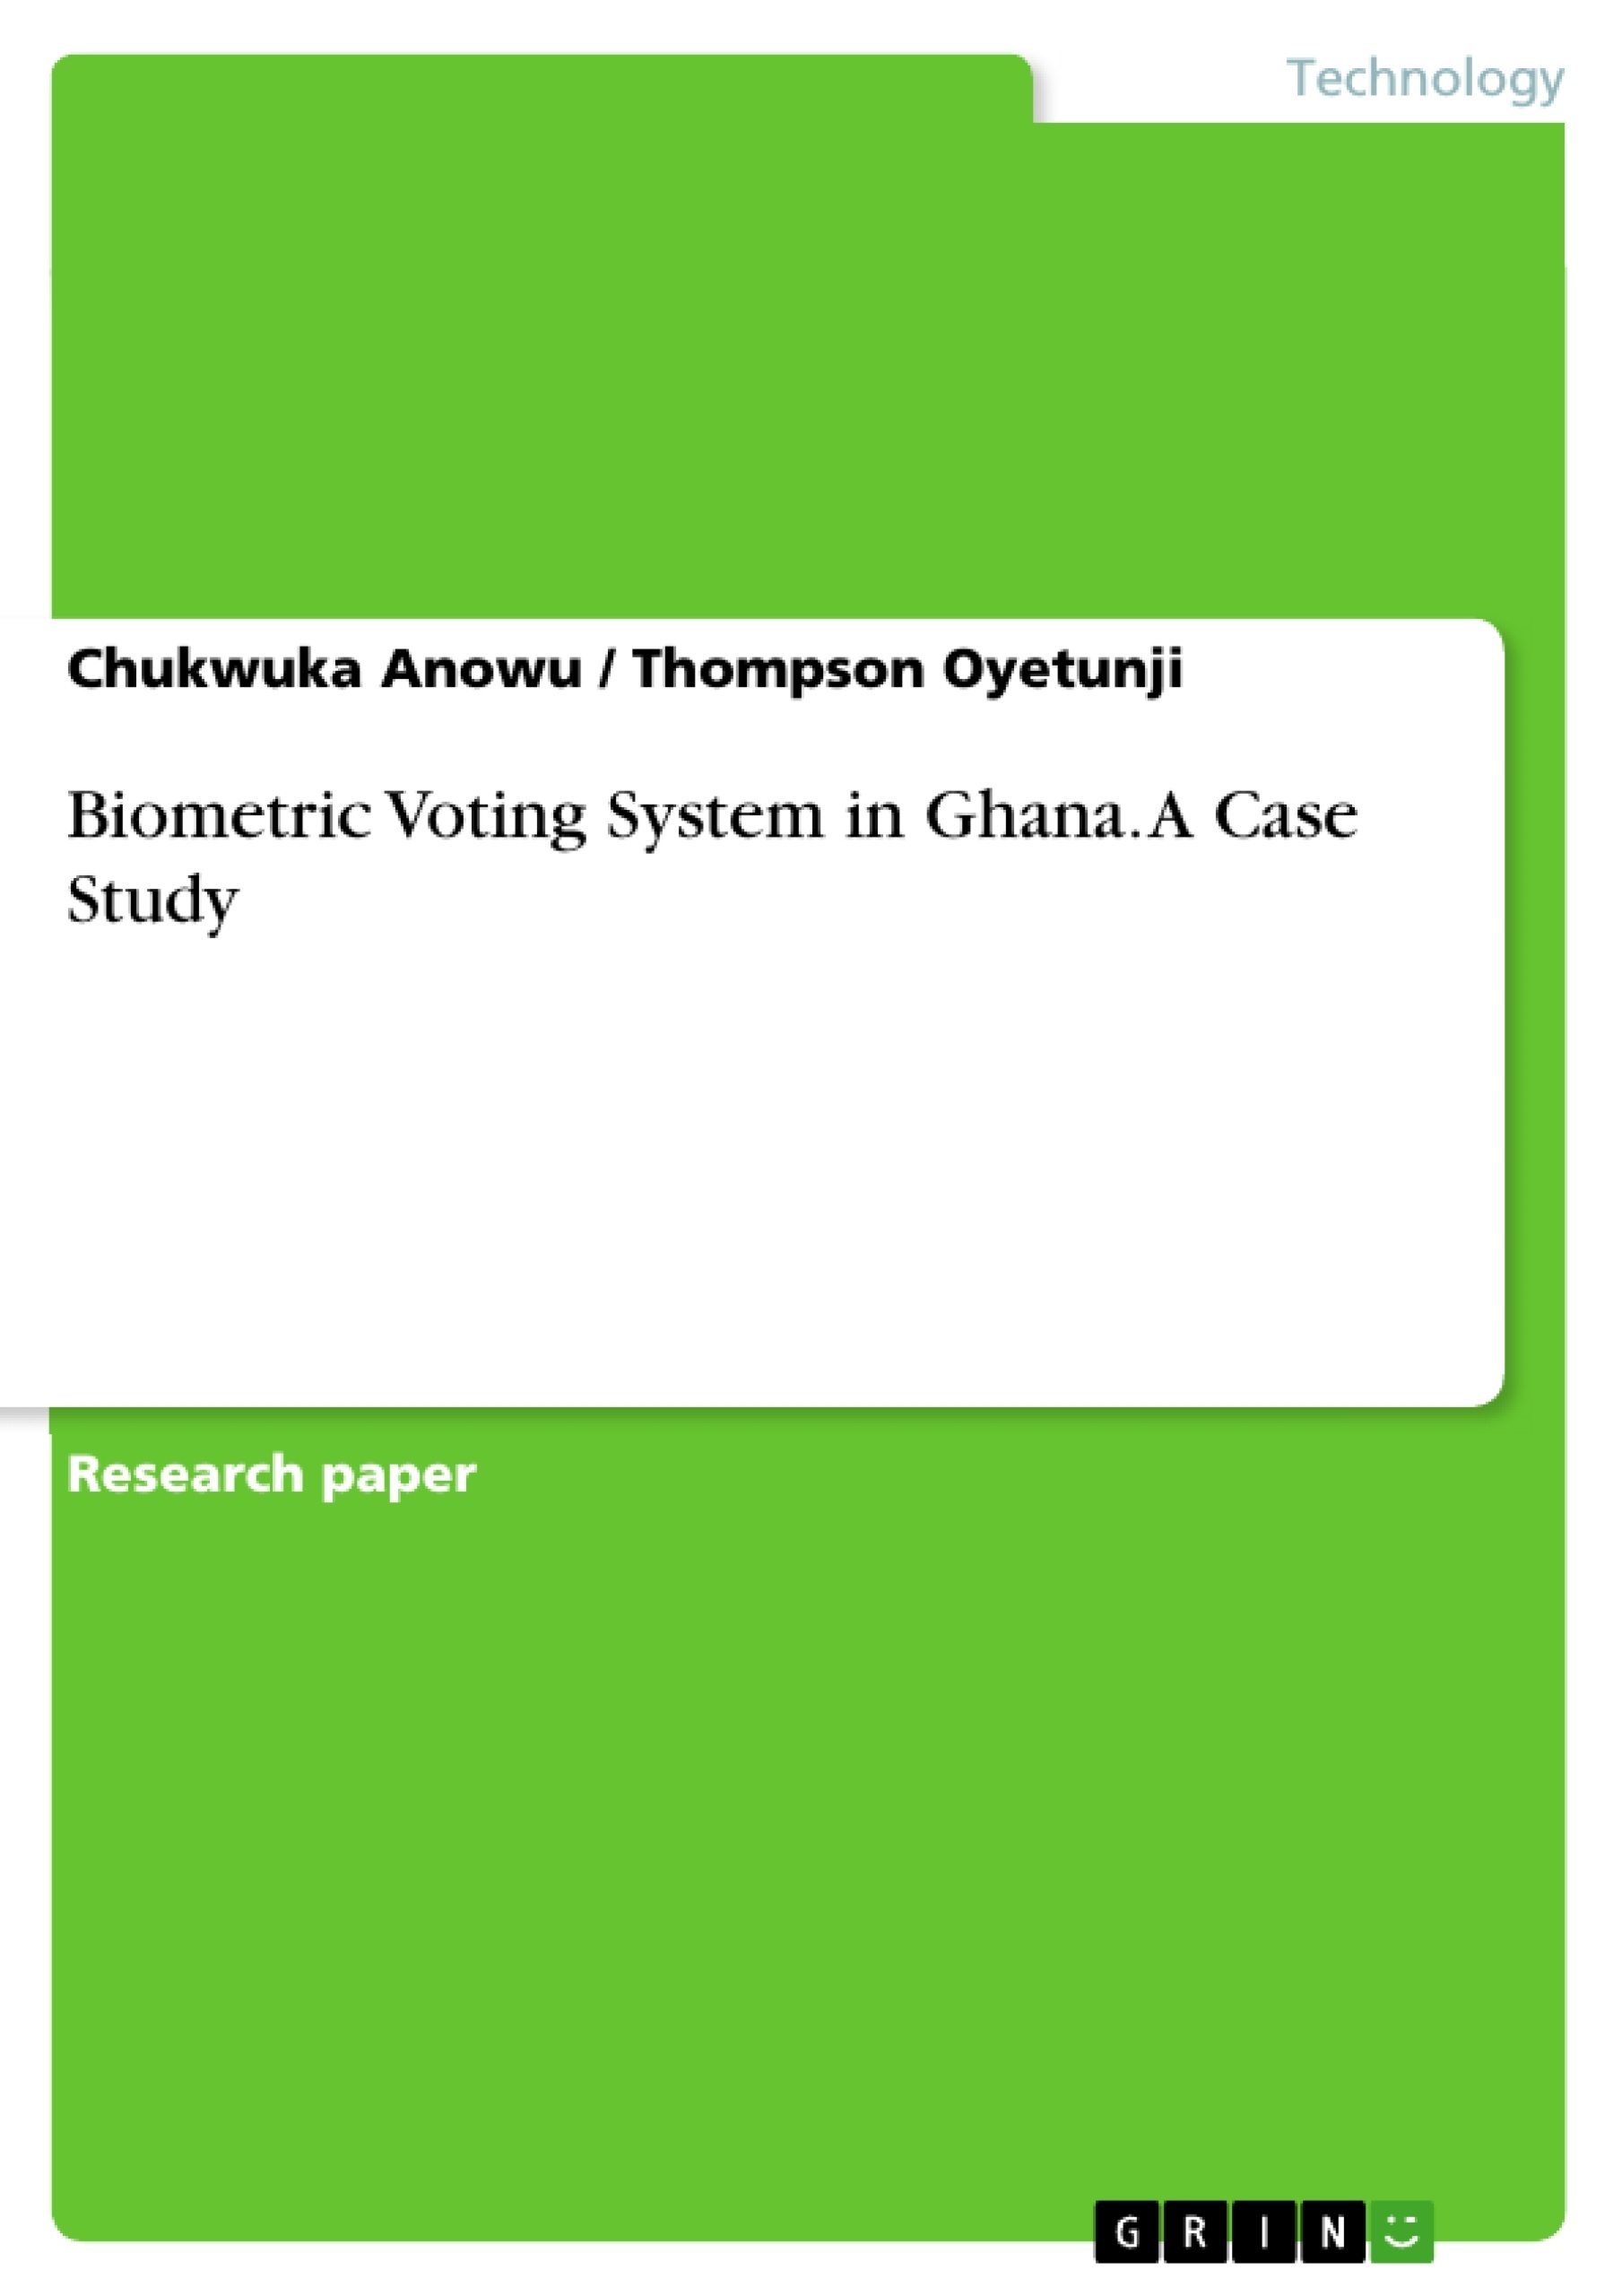 Title: Biometric Voting System in Ghana. A Case Study